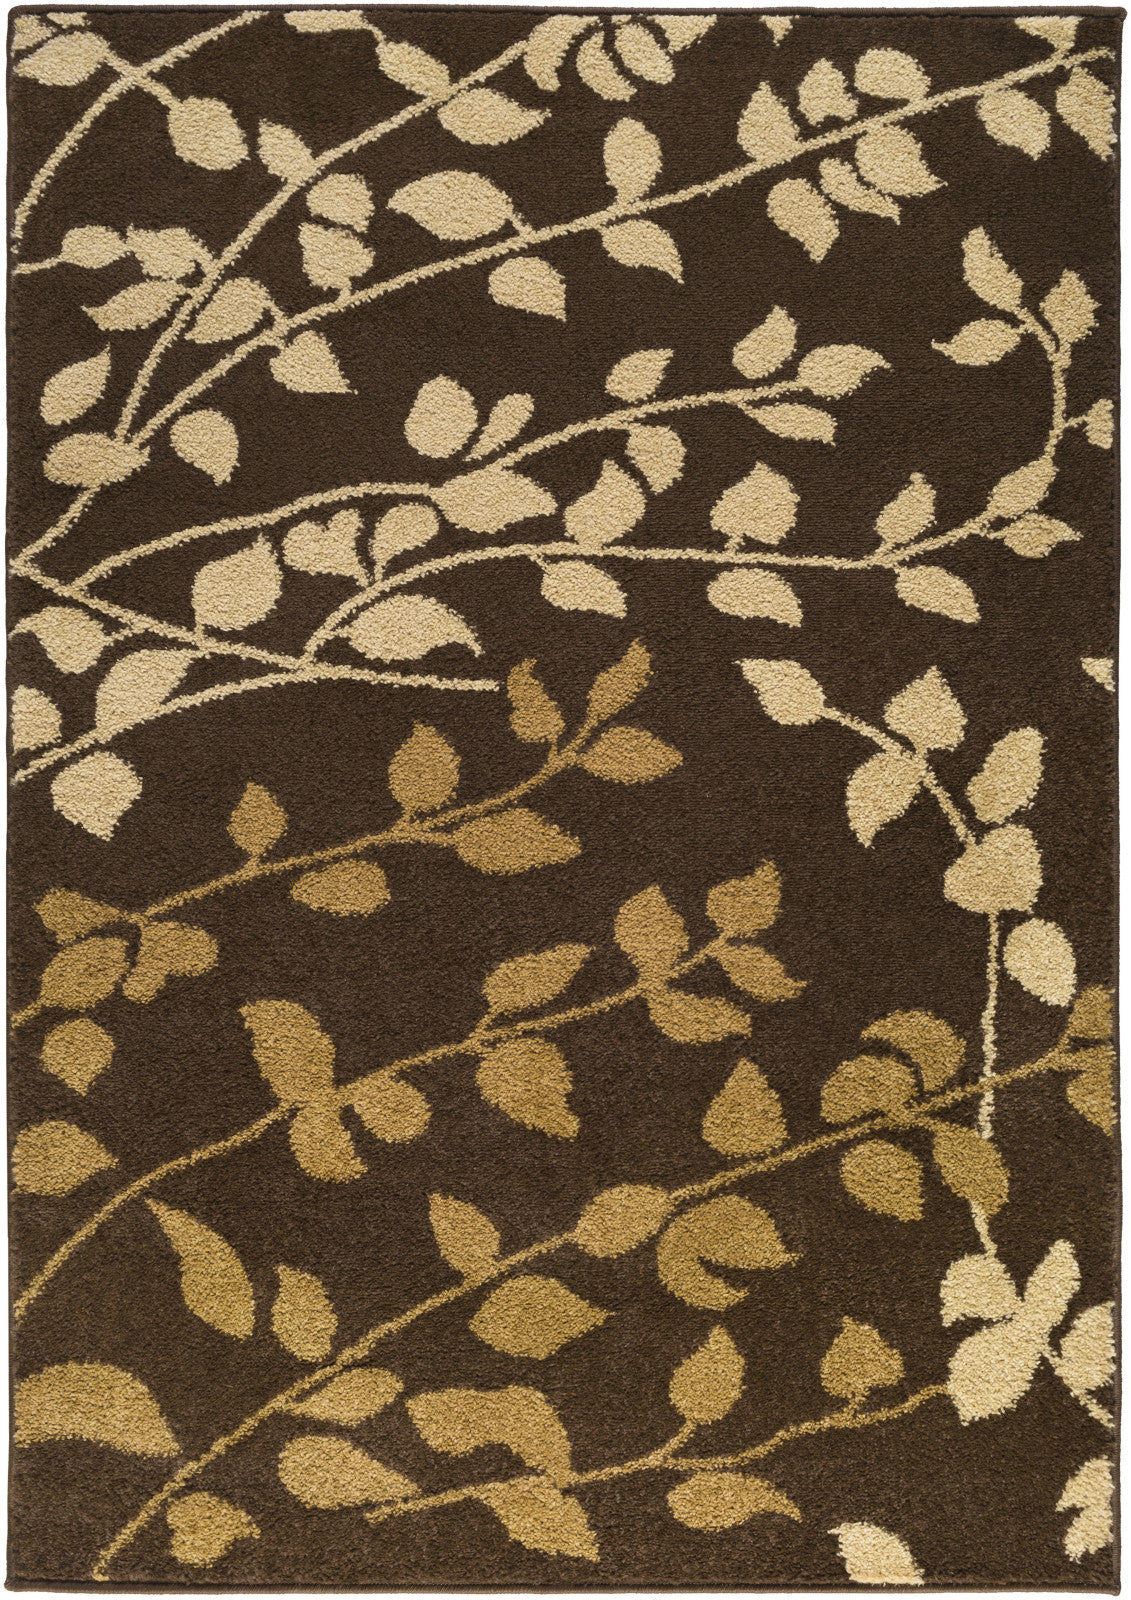 Surya River Home RVH-1004 Brown Area Rug by Mossy Oak